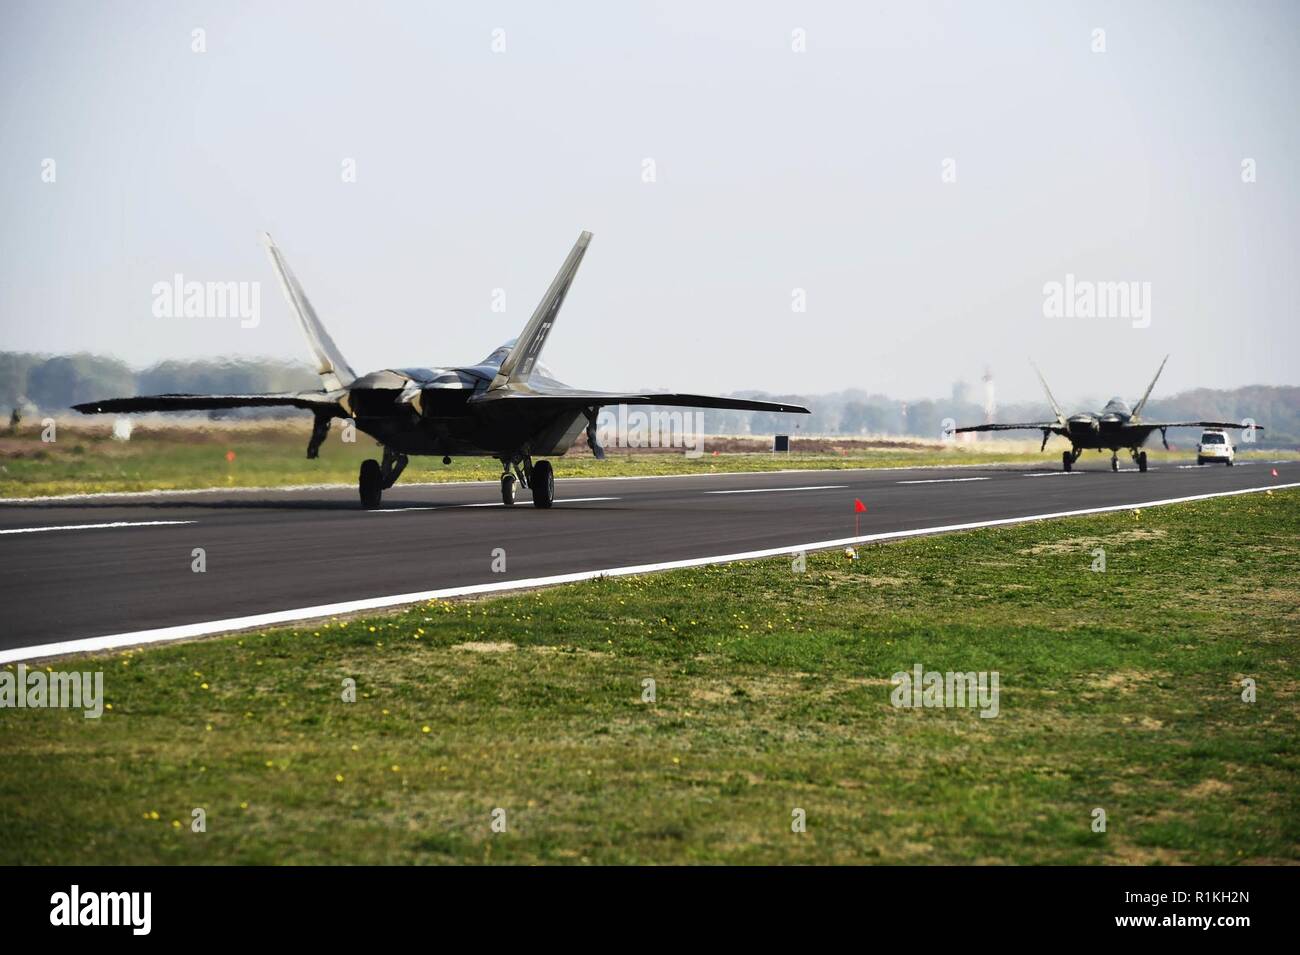 F-22 Raptors from the 1st Fighter Wing out of Joint Base Langley-Eustis, Va., arrive at Kleine-Brogel Air Base, Belgium, Oct. 17, 2018. The aircraft are part of Raptor Redeploy 19-1, conducting short-term visits across Europe. Stock Photo